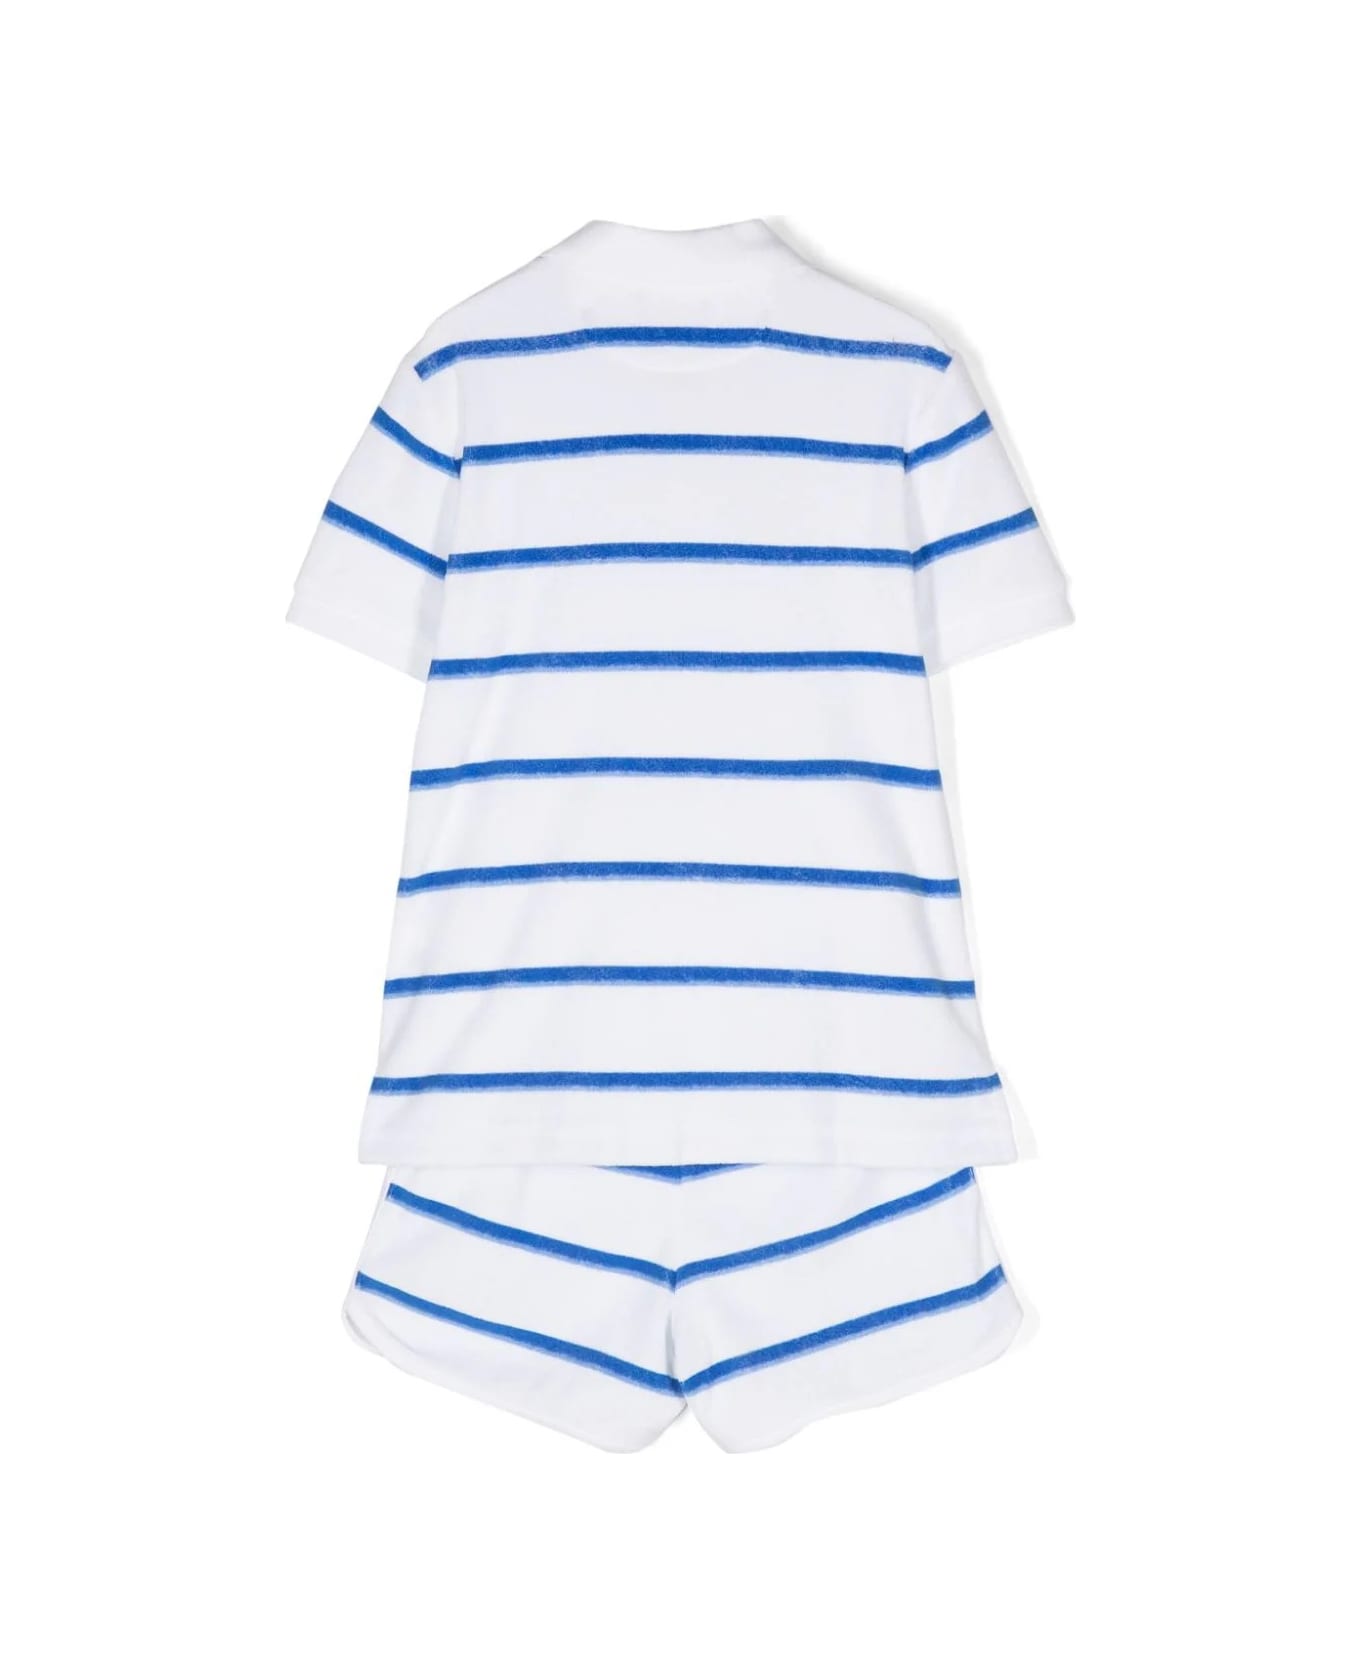 Ralph Lauren Blue And White Striped Set With Pony - White